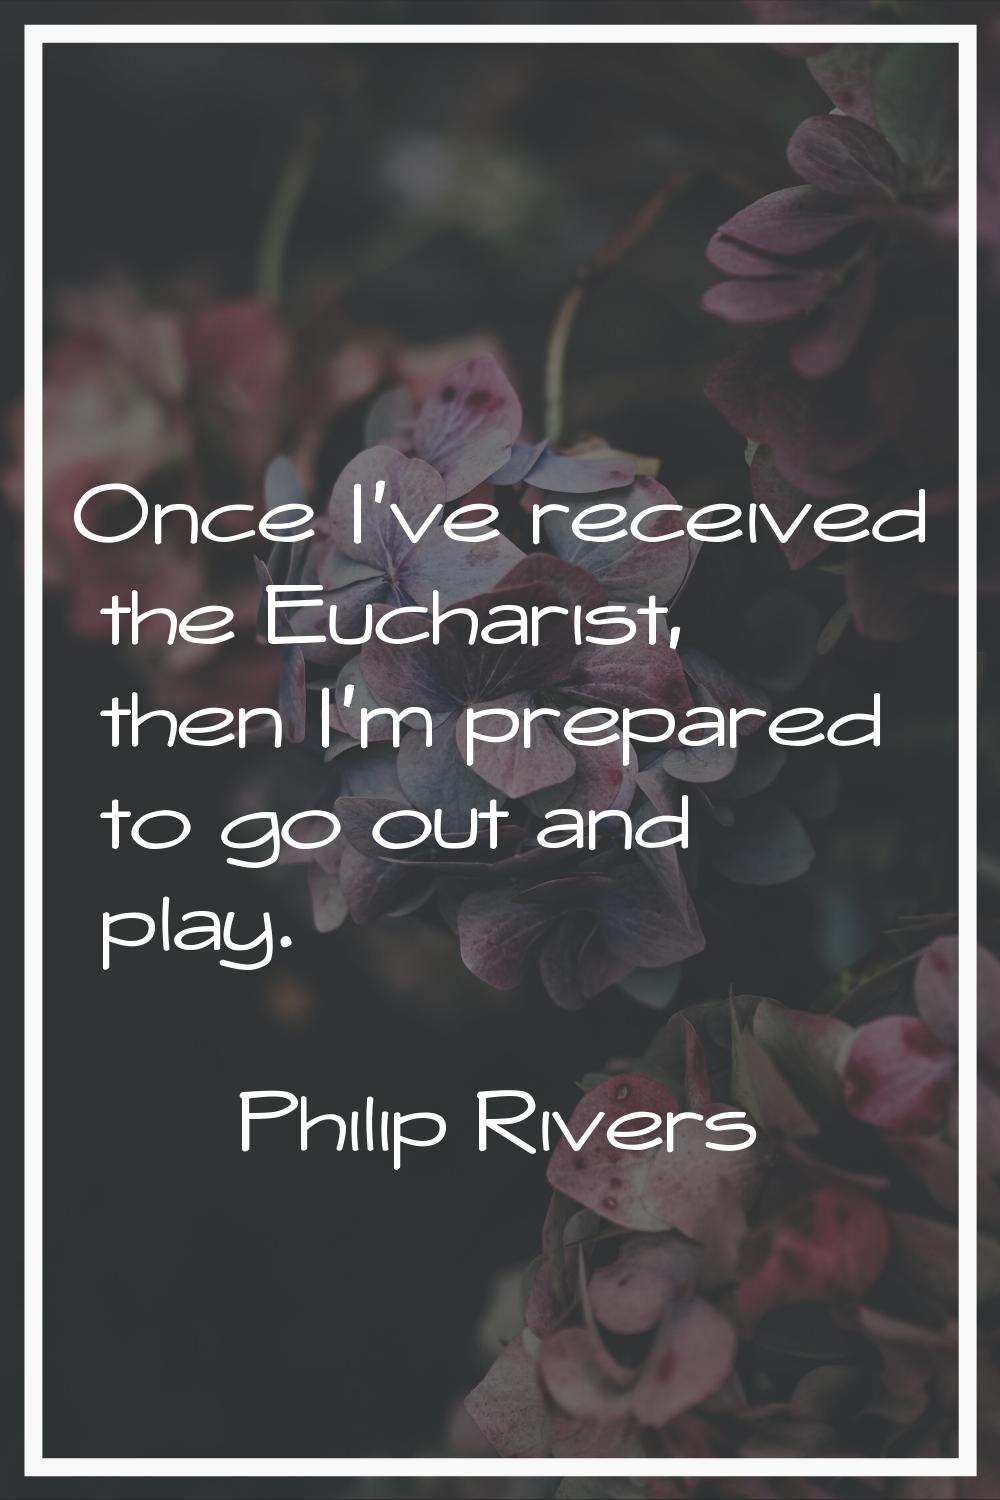 Once I've received the Eucharist, then I'm prepared to go out and play.